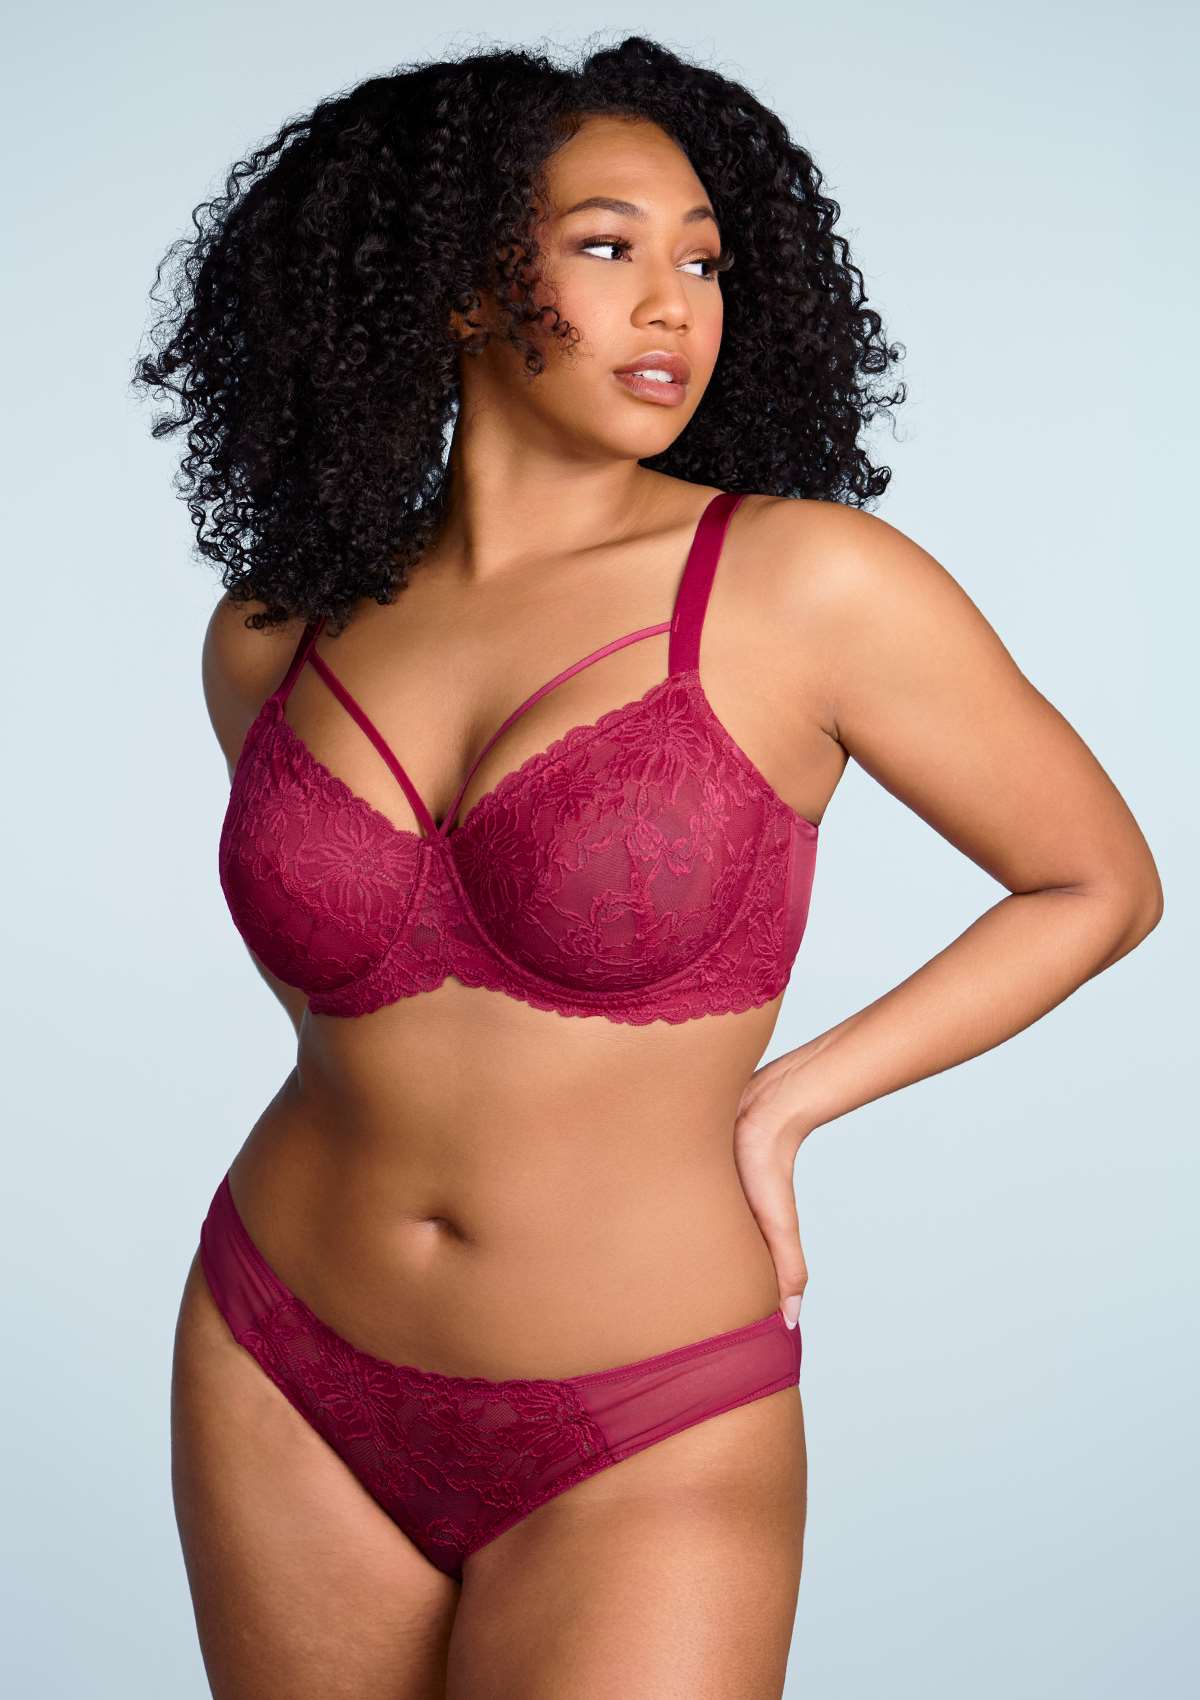 HSIA Pretty In Petals Lace Panties And Bra Set: Plus Size Women Bra - Red / 44 / B